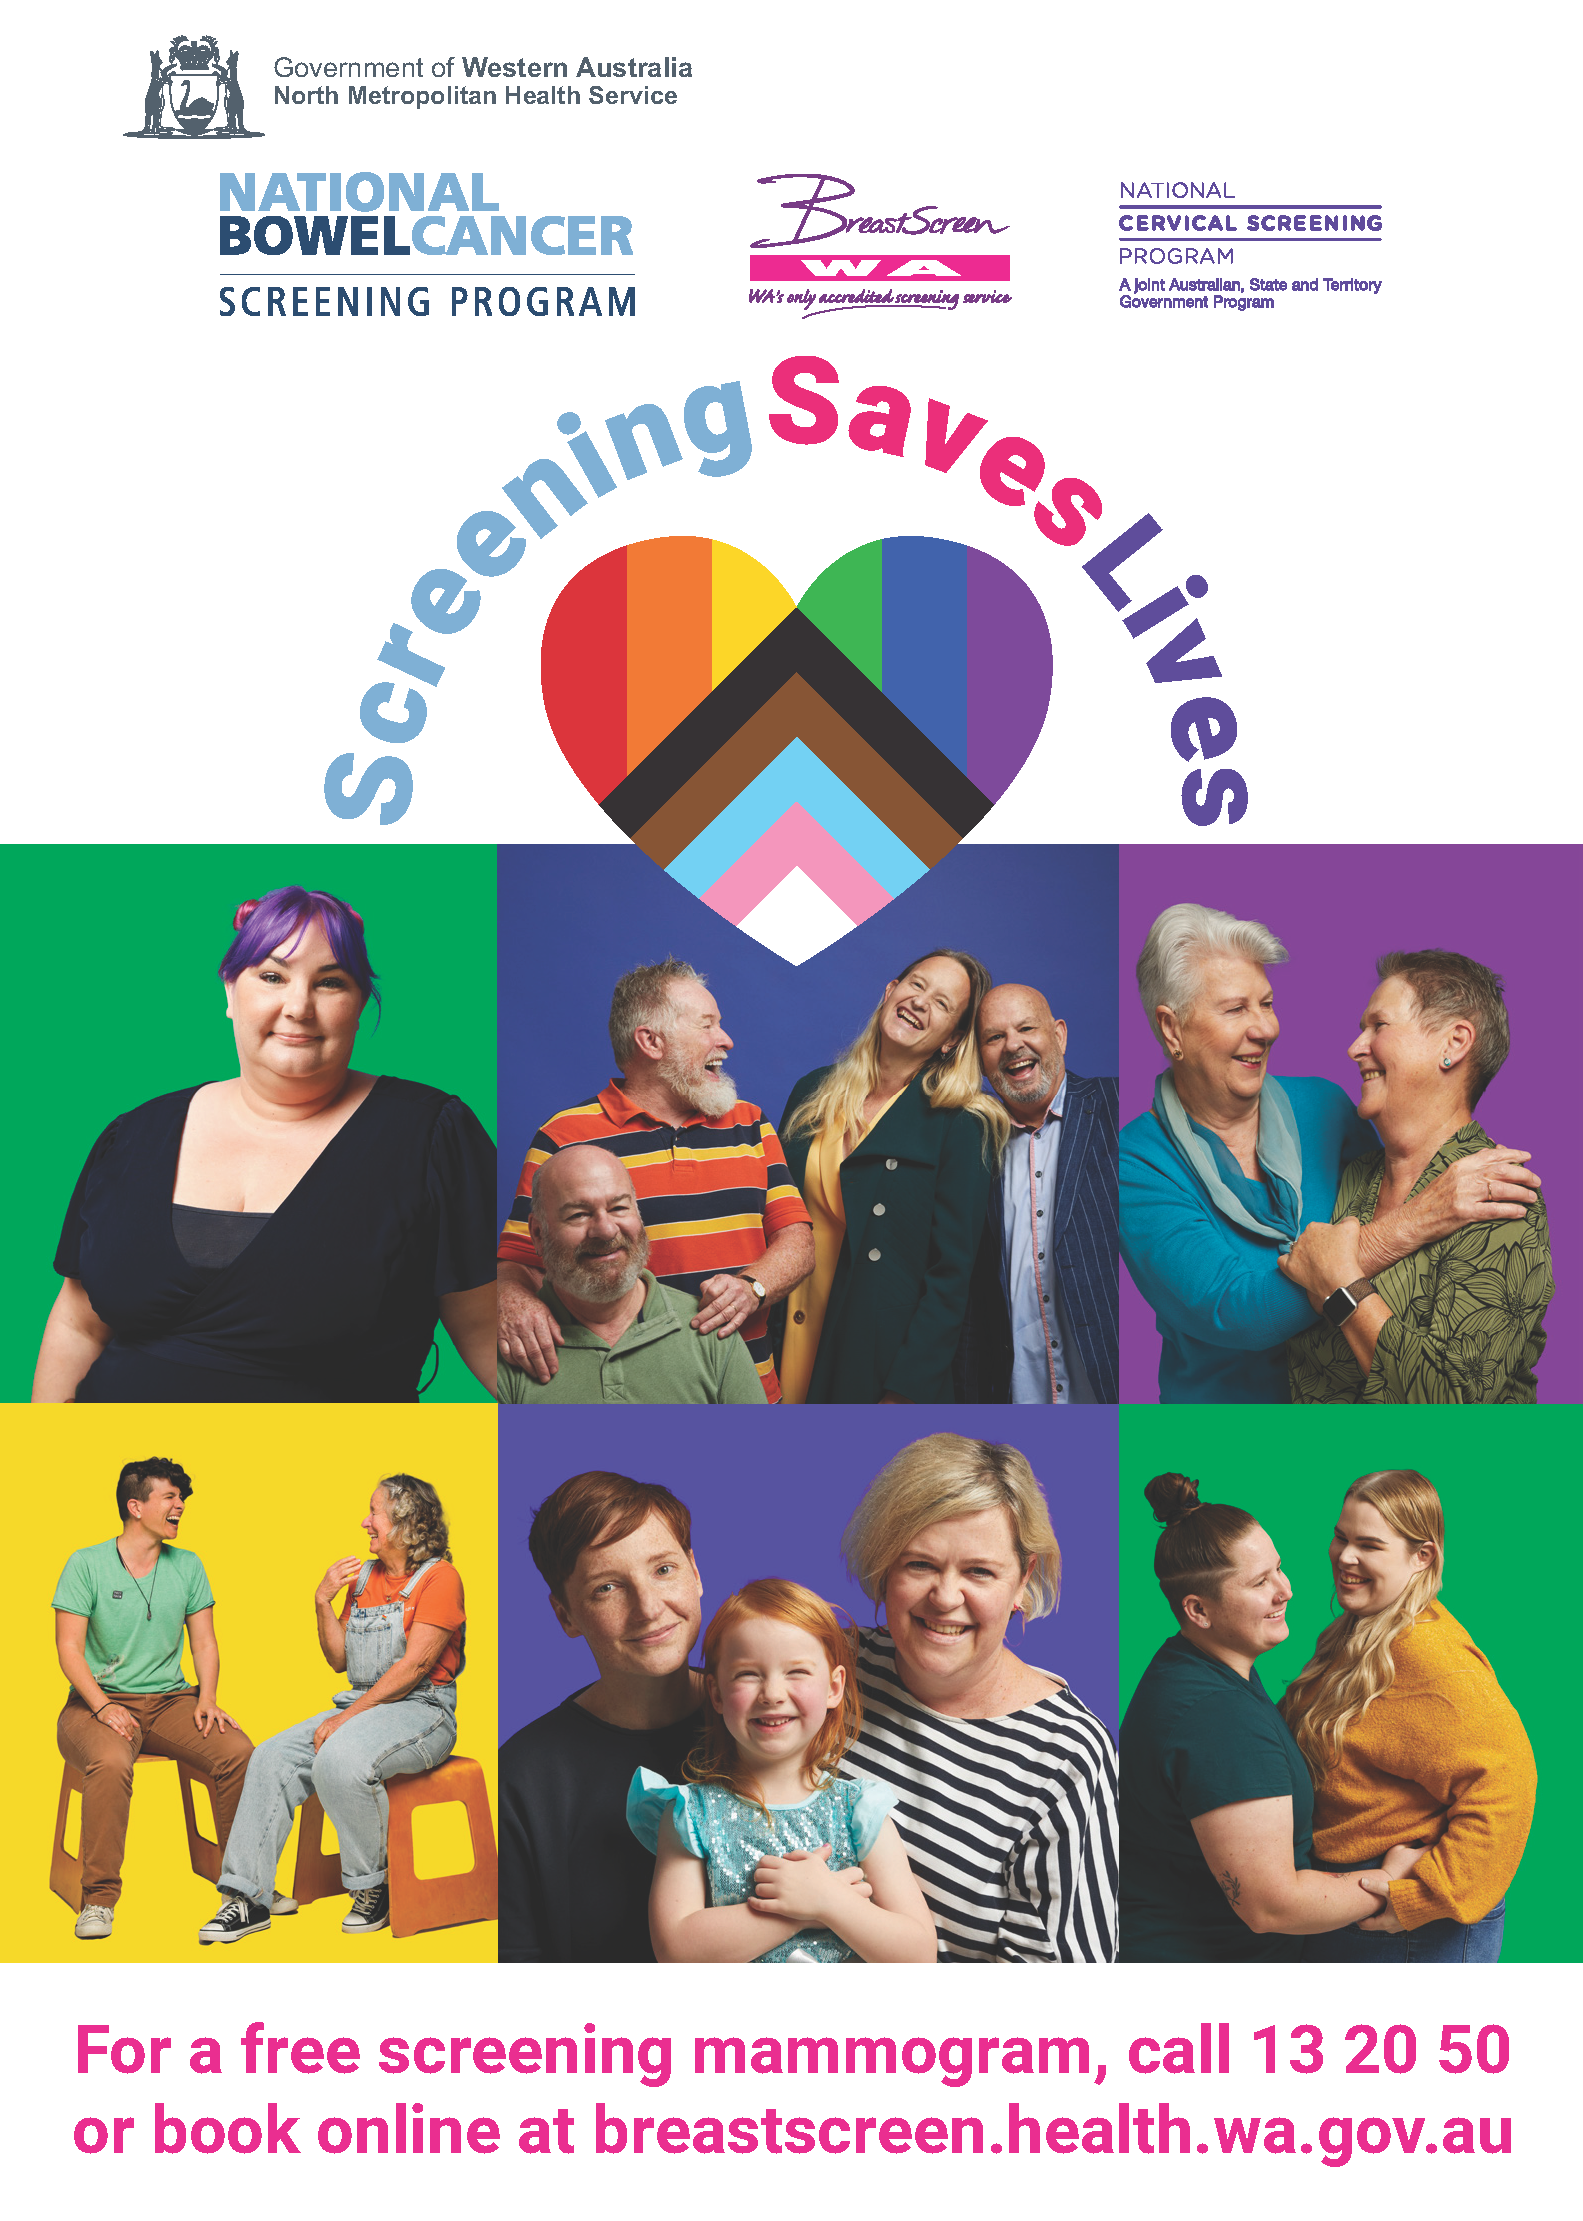 The Screening Saves Lives ad in The West newspaper